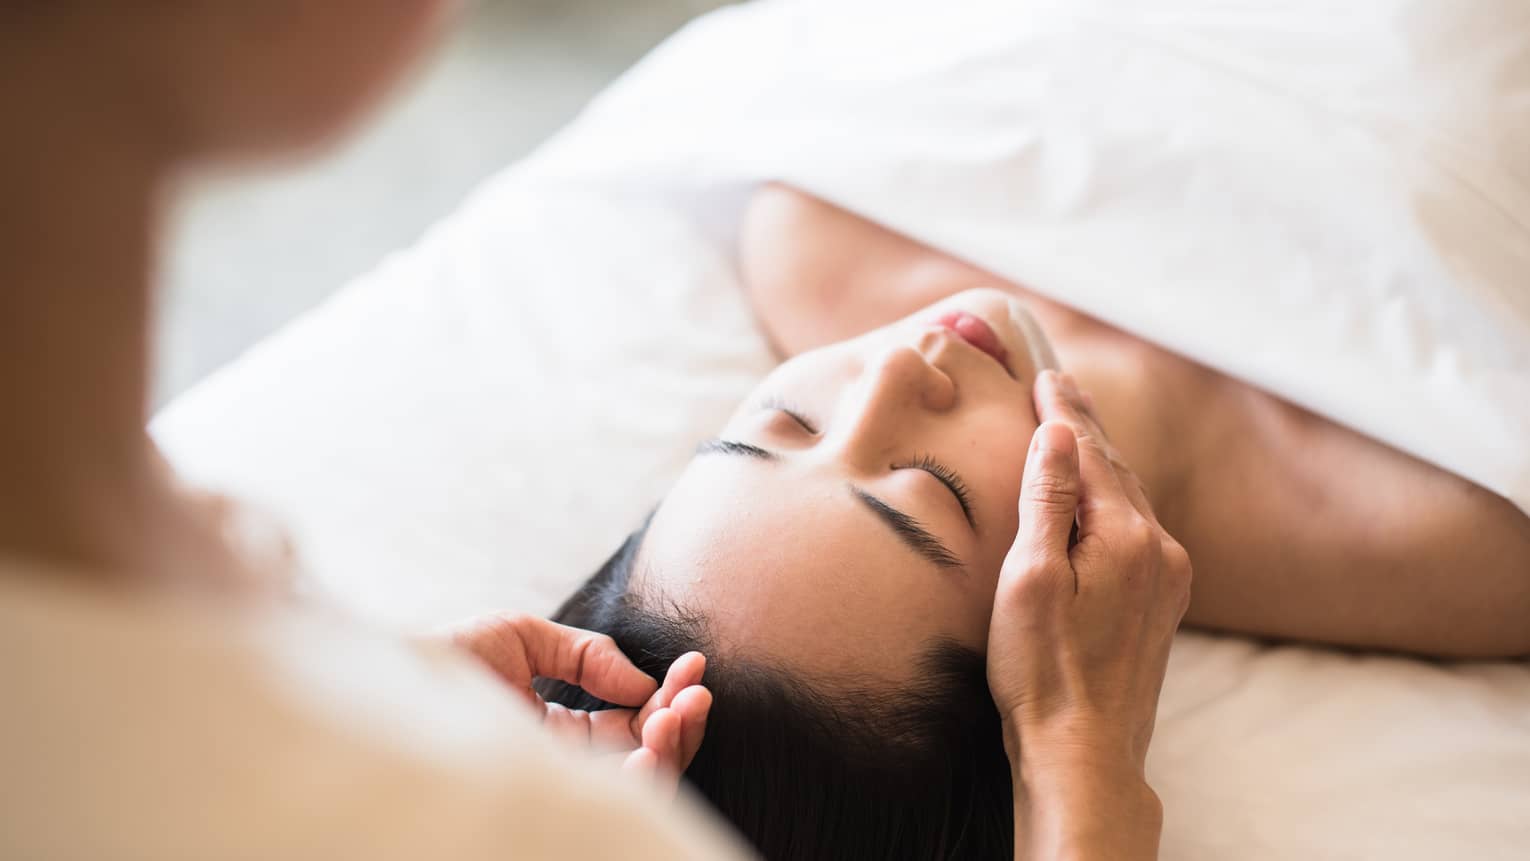 Woman lying under white sheet on massage table, eyes closed as spa staff rubs lotion on her chin